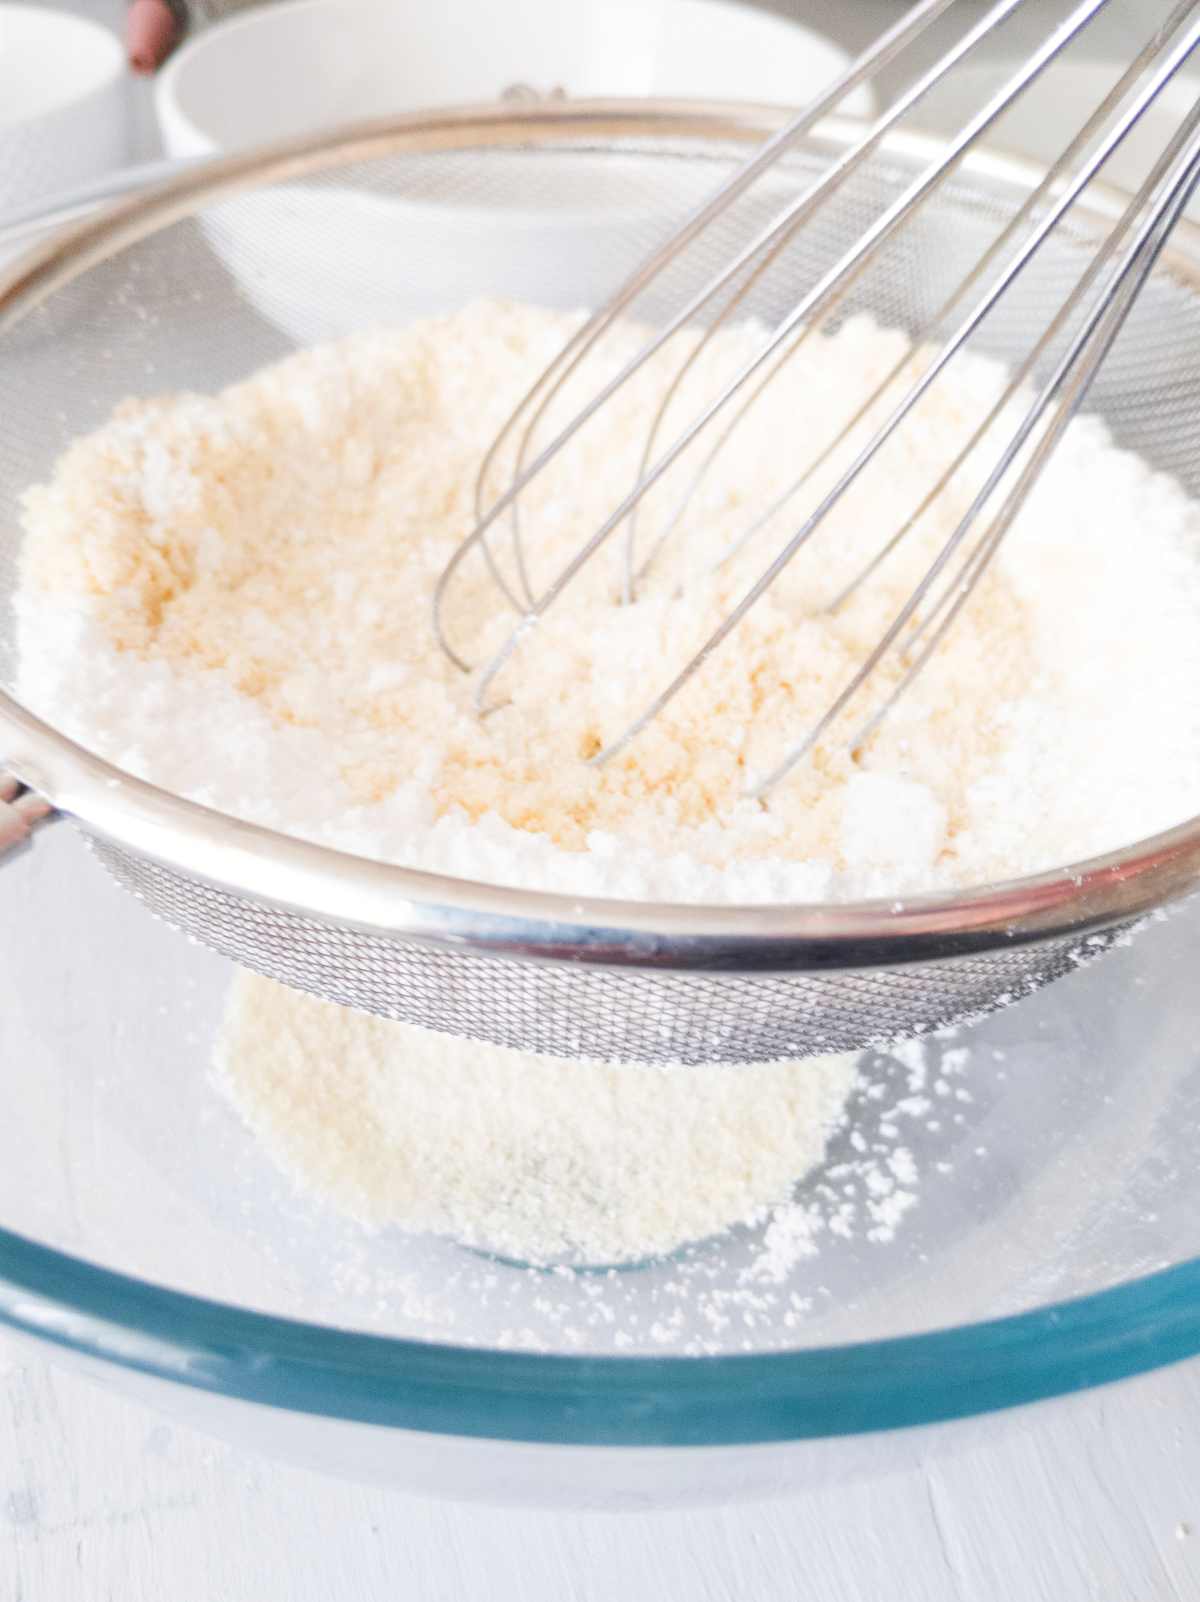 Sieving coconut flour and powdered sugar over a glass bowl with a whisk.